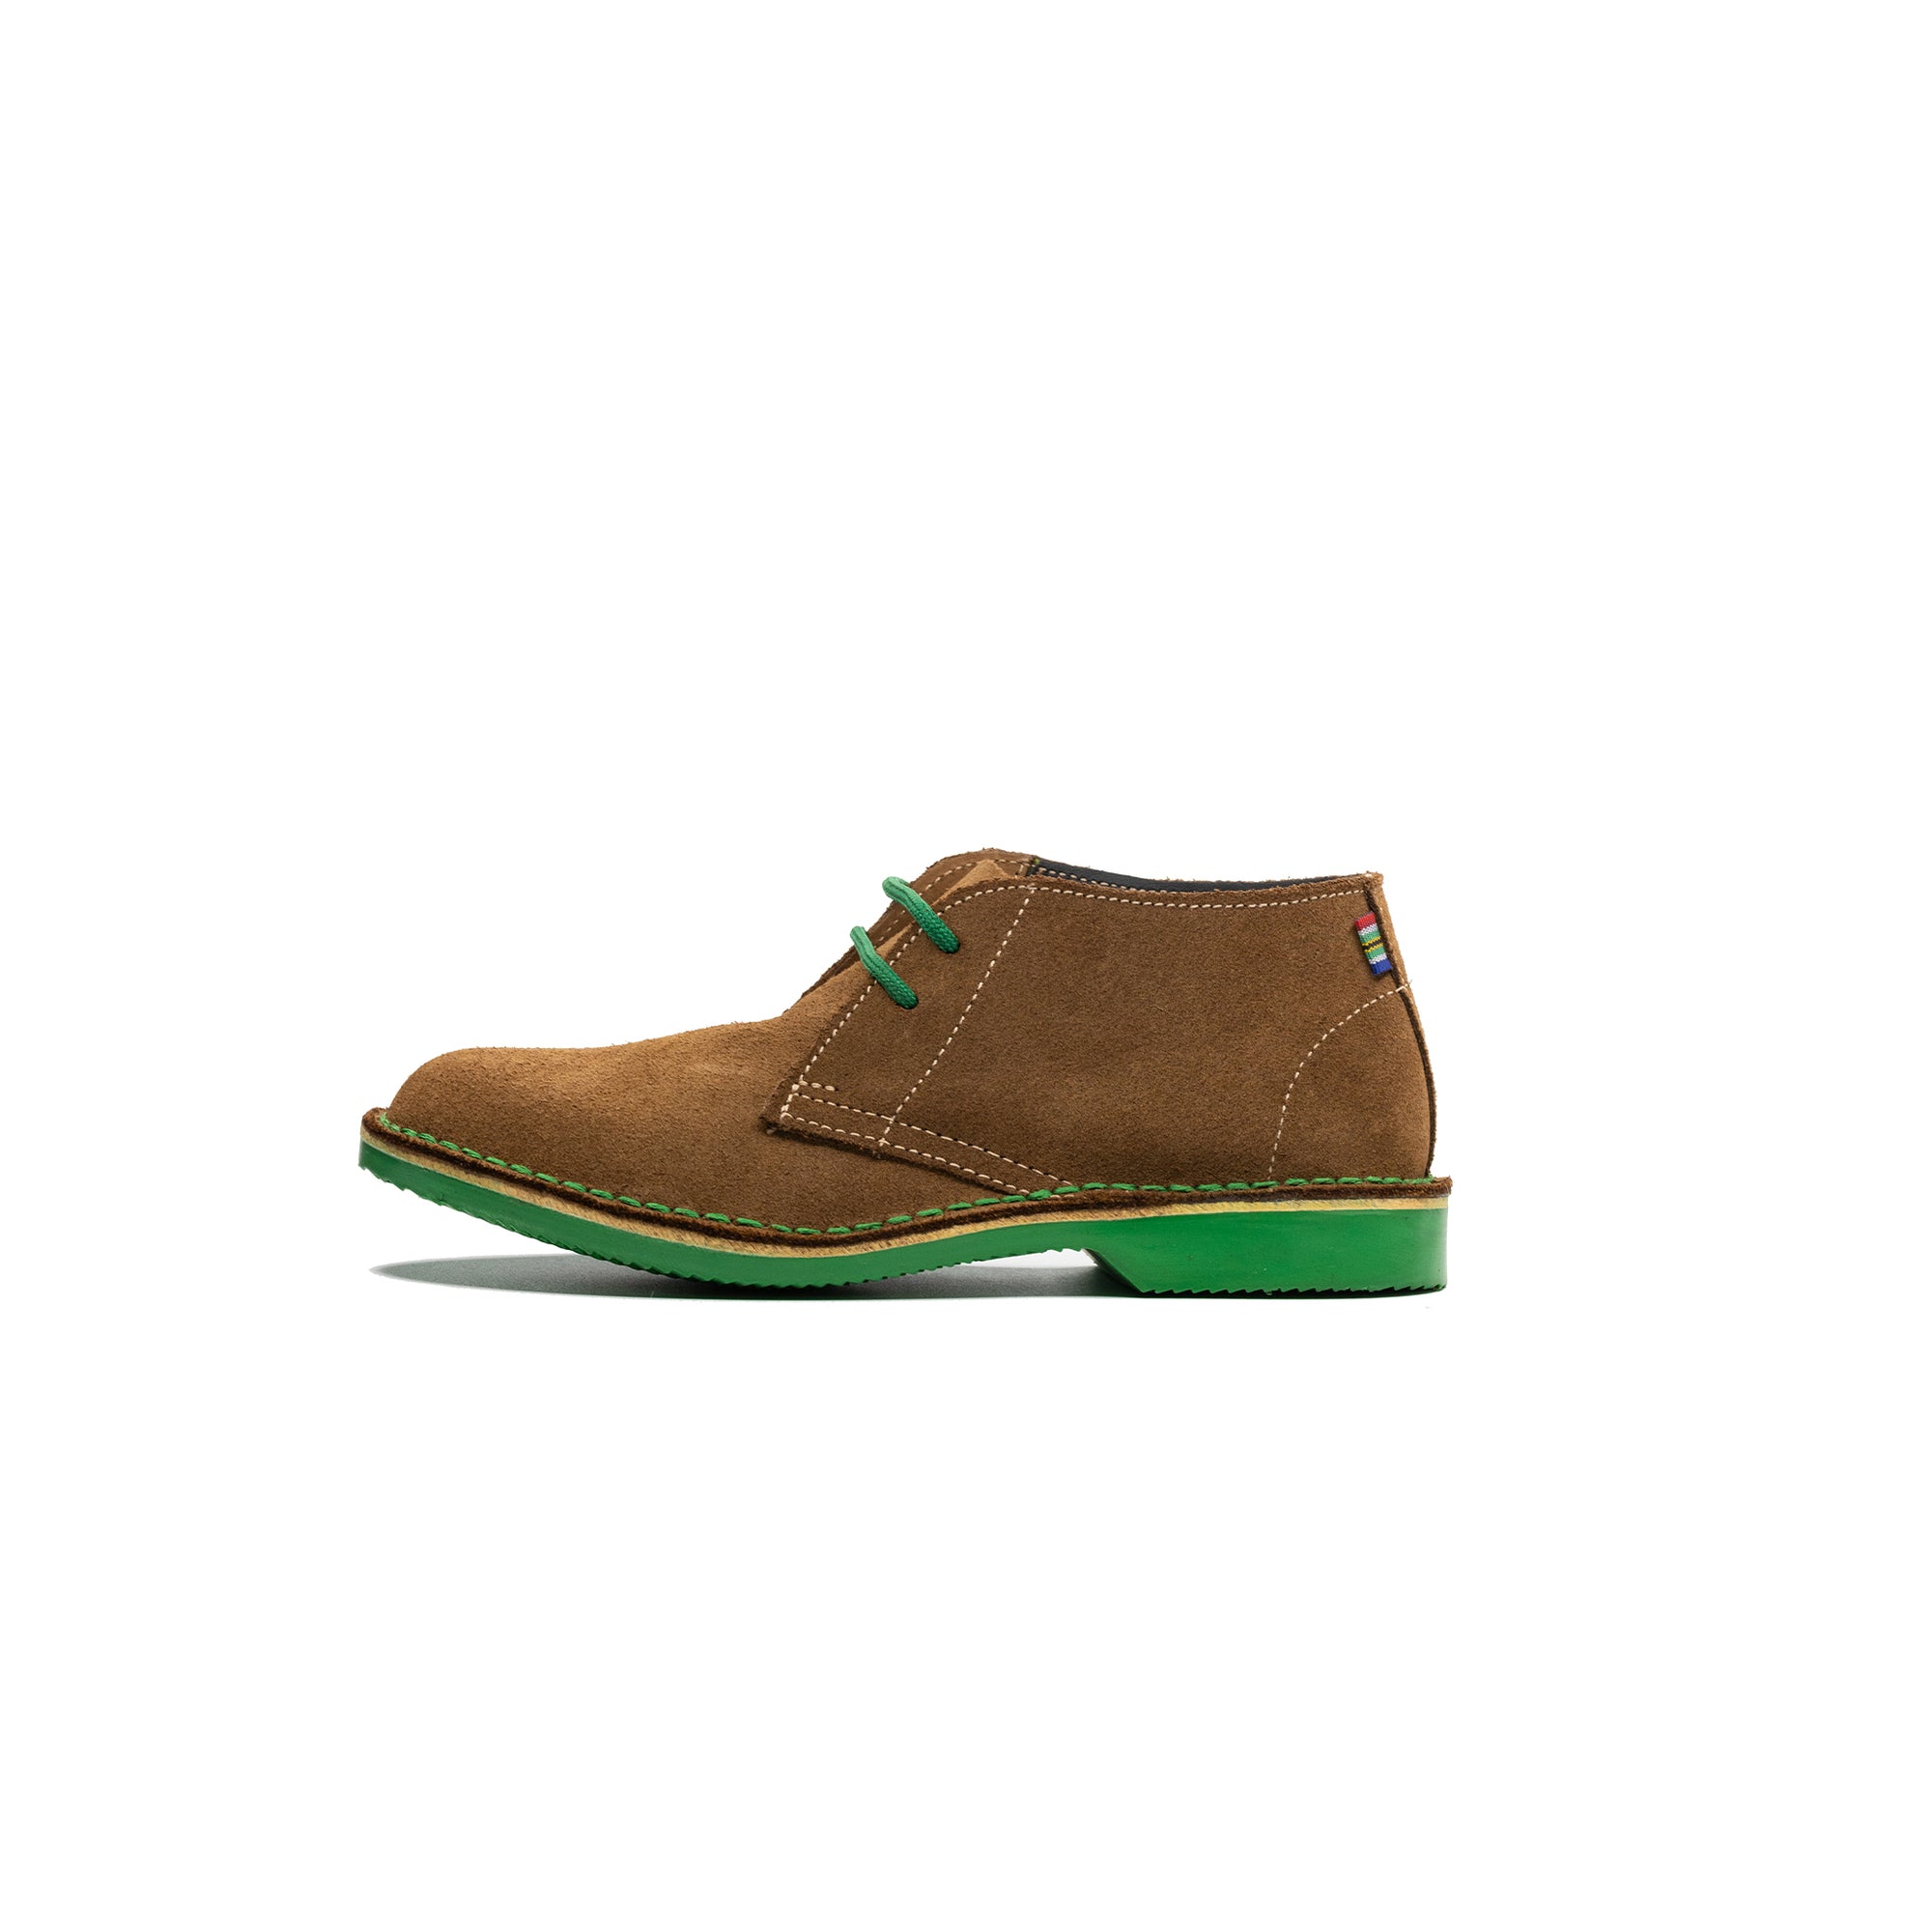 Heritage Lowveld (green sole)